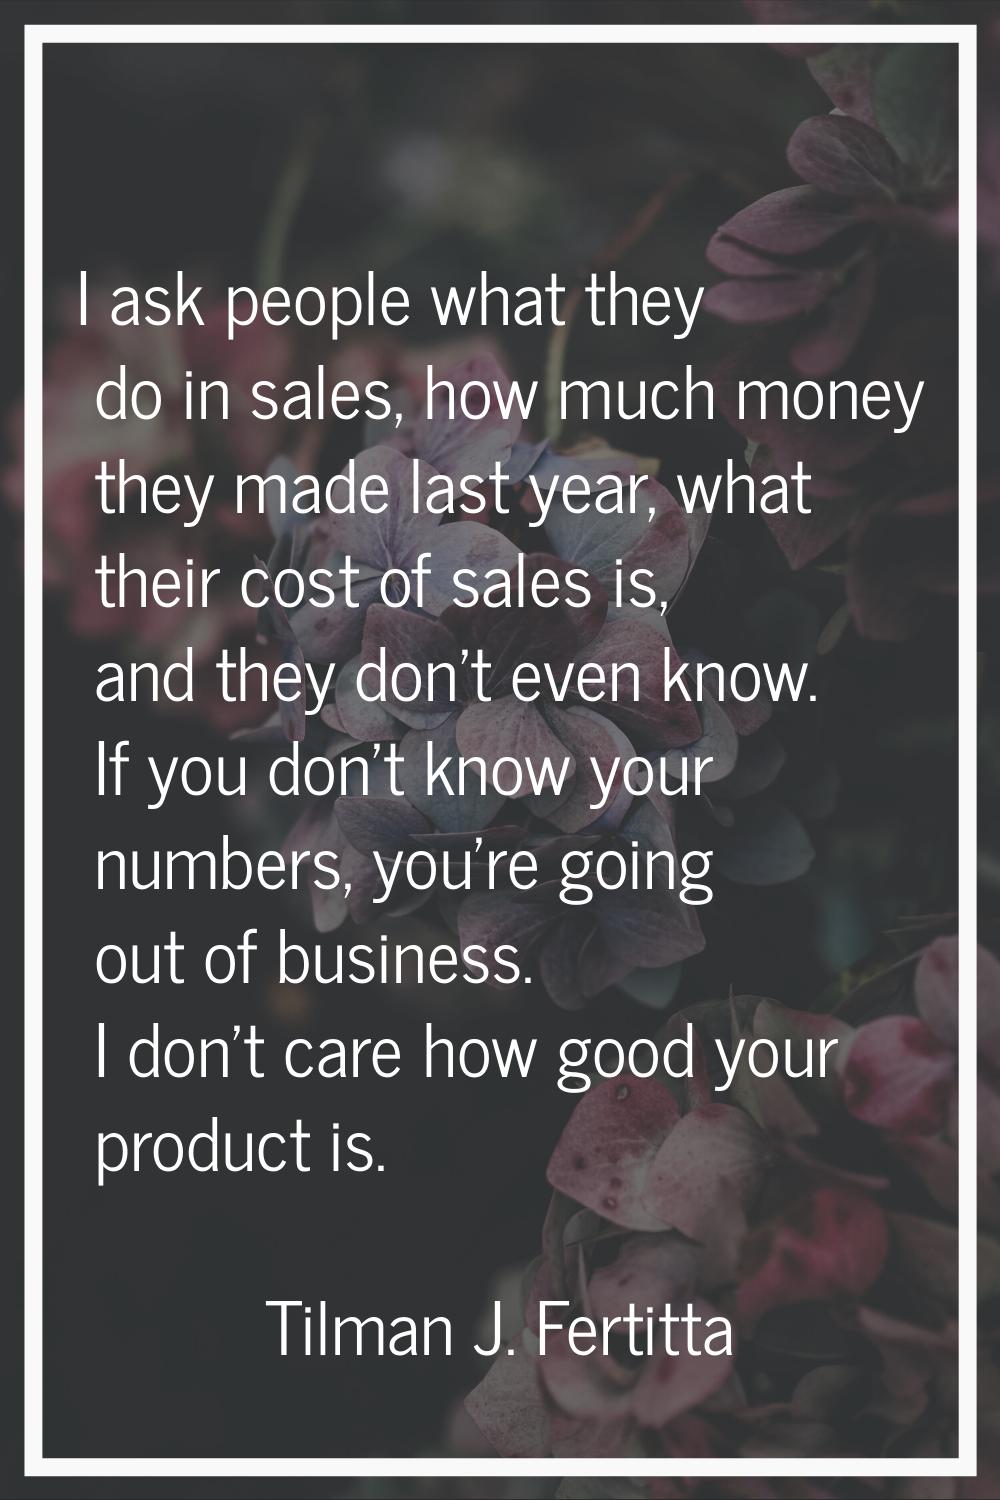 I ask people what they do in sales, how much money they made last year, what their cost of sales is